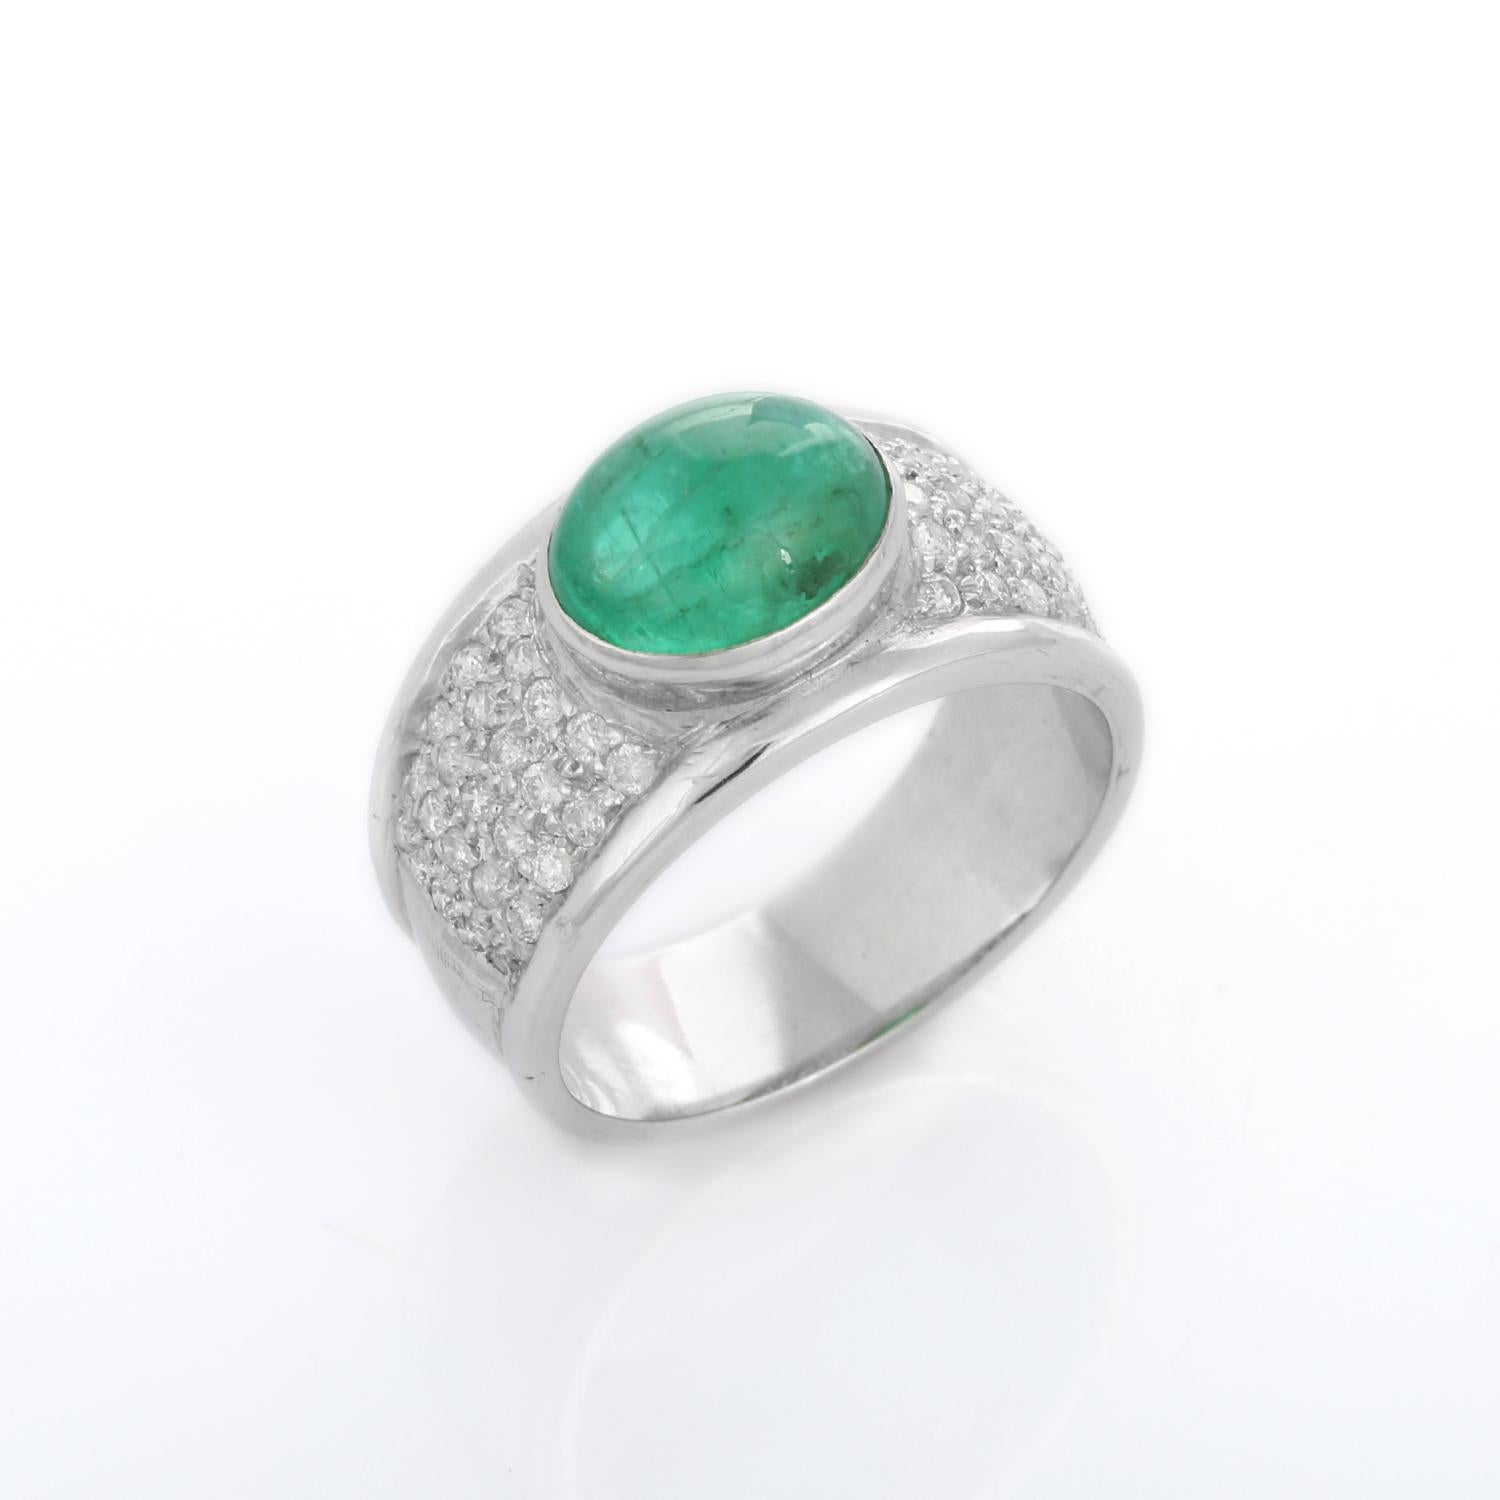 For Sale:  3.08 Carat Oval Shaped Emerald and Diamond Cocktail Ring in 18K White Gold 7